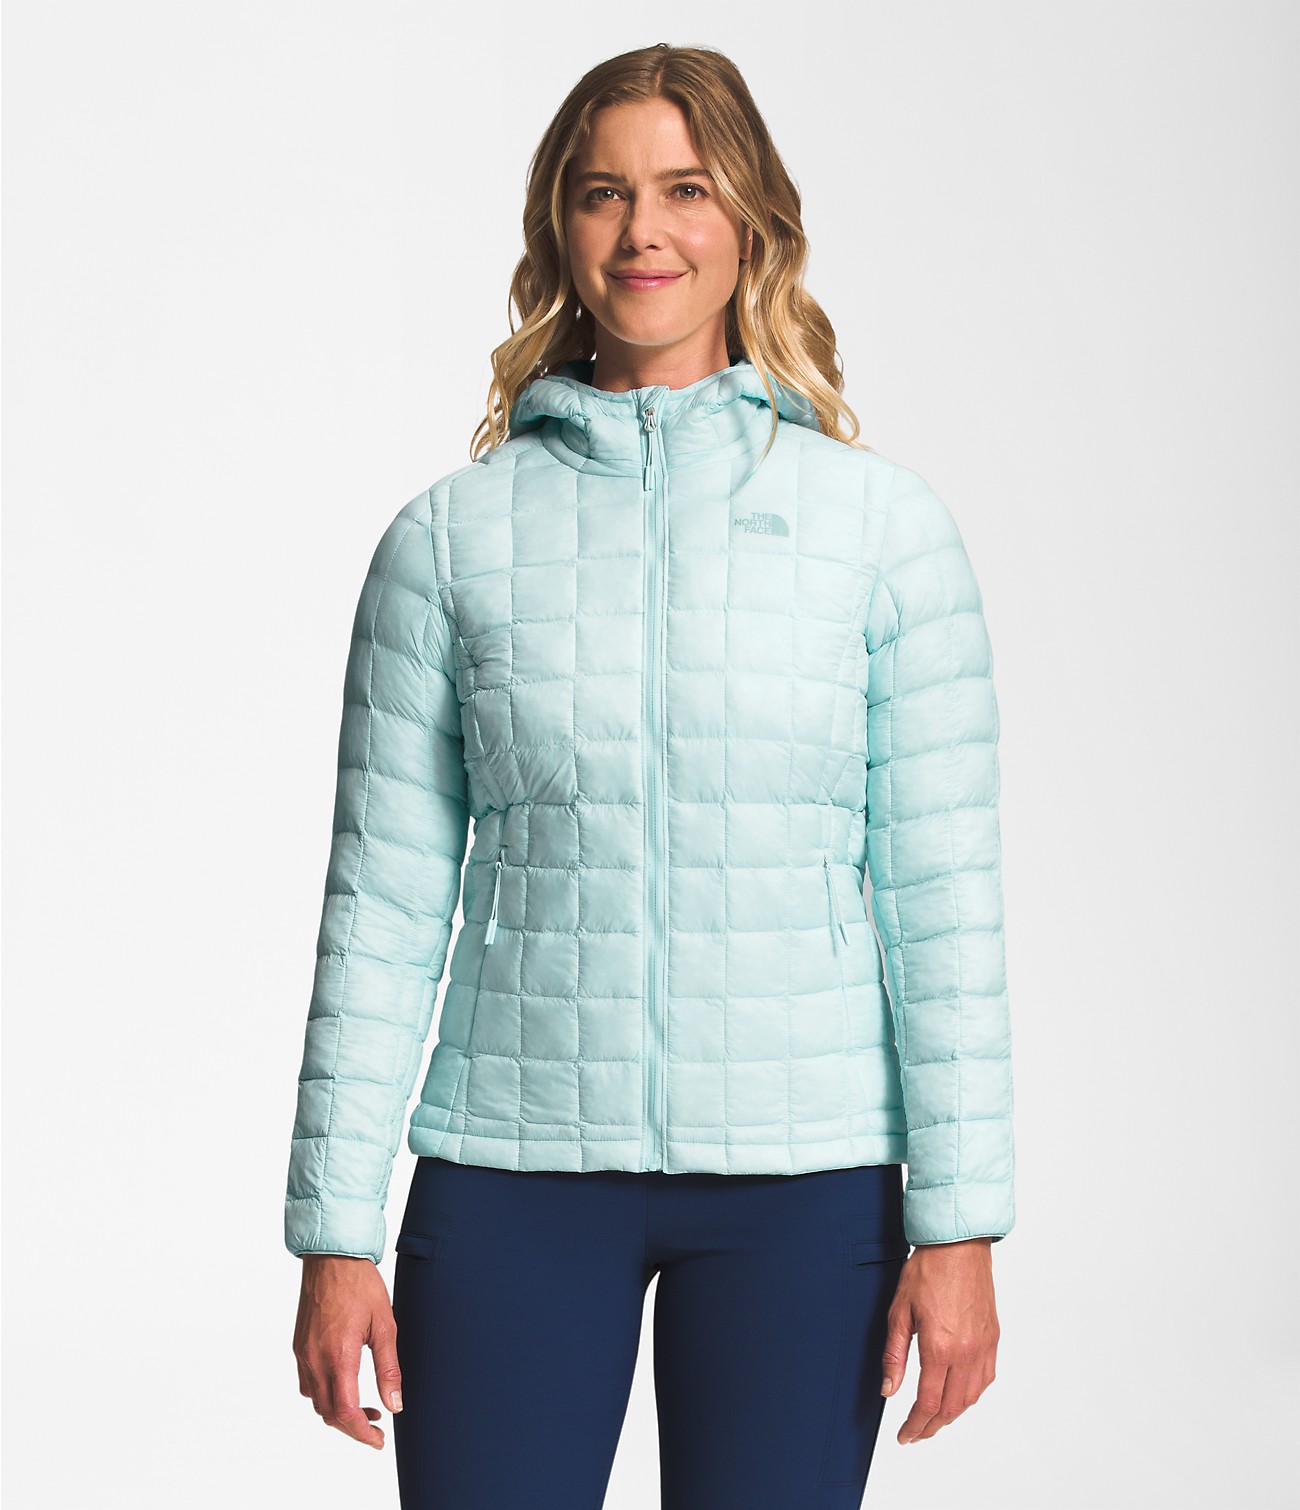 New With Tags! The North Face Fuse Jacket Summit Series HyVent 2.5